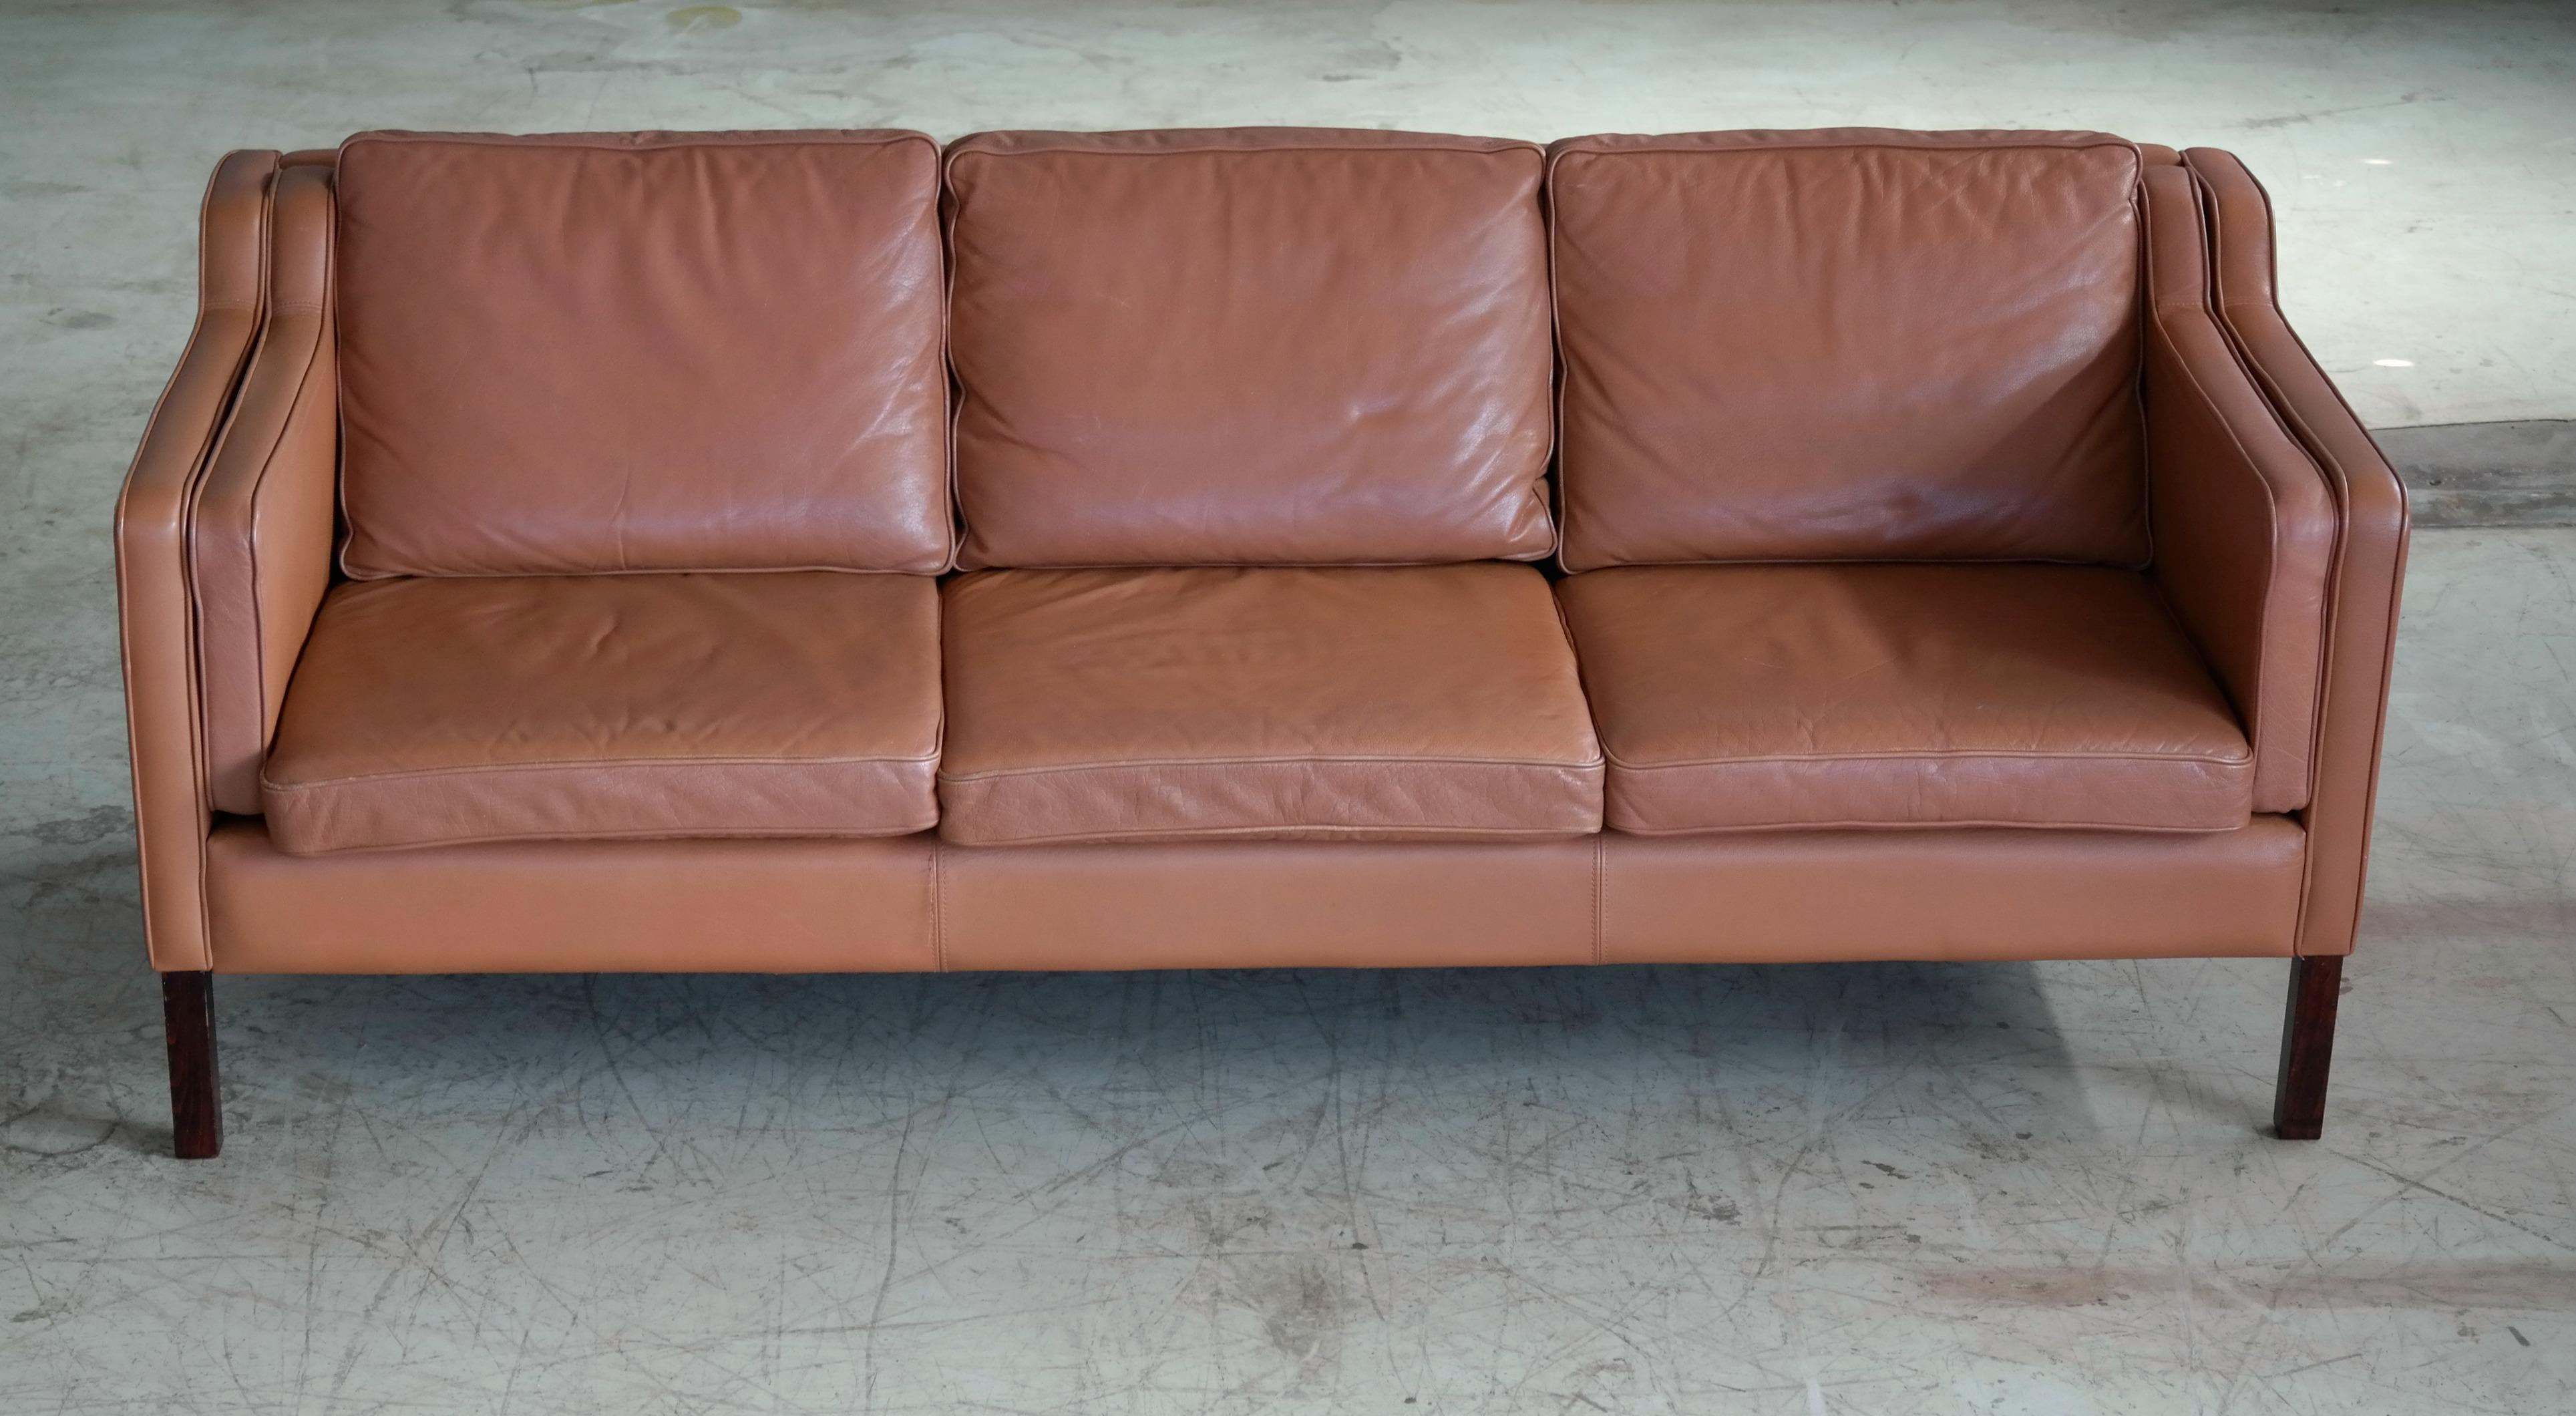 Borge Mogensen Style Model 2213 Three-Seat Sofa in Cognac Leather by Stouby 2